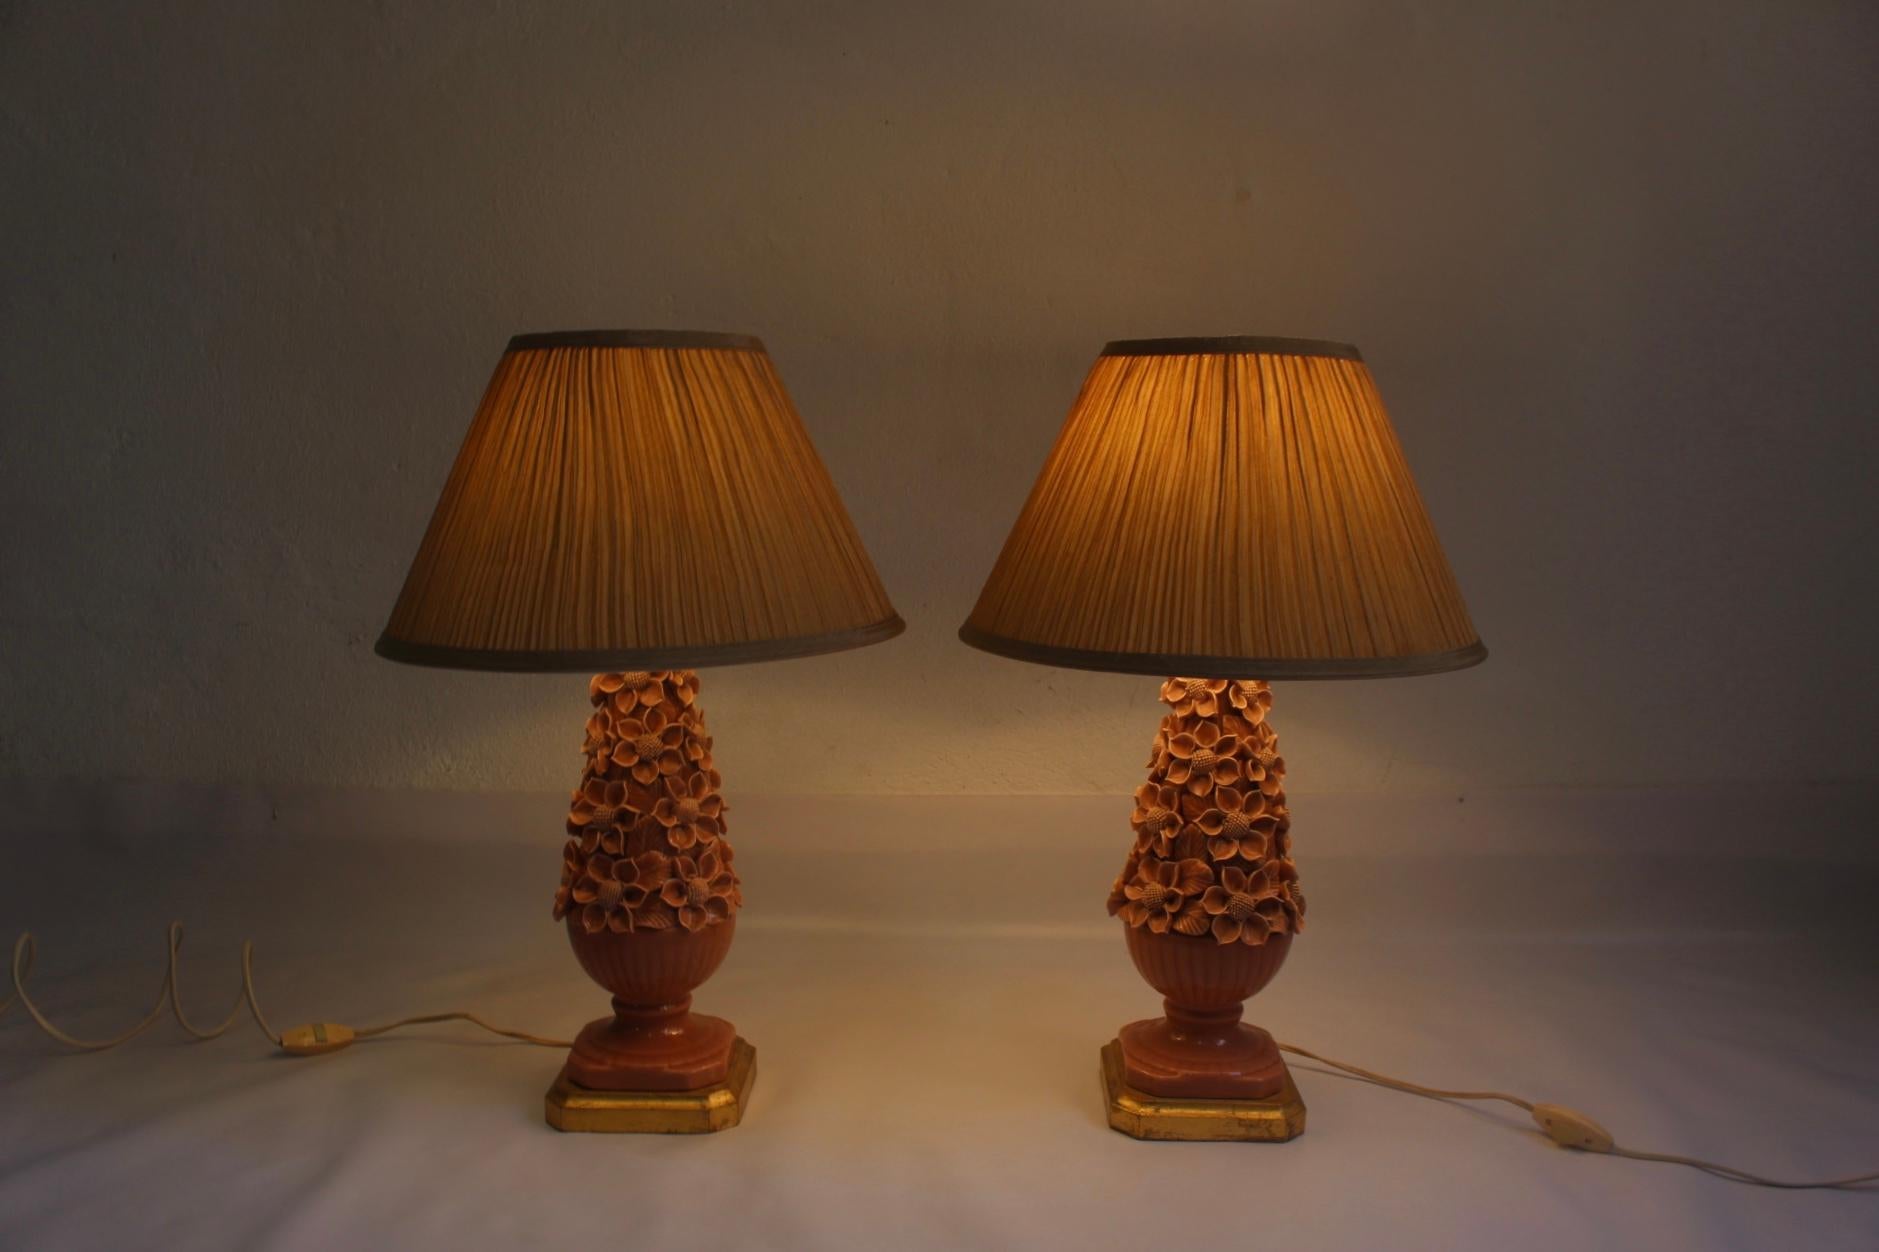 Mid-Century Modern Set of 2 Ceramic Manises Flower Table Lamps in Salmon Color, 1950s For Sale